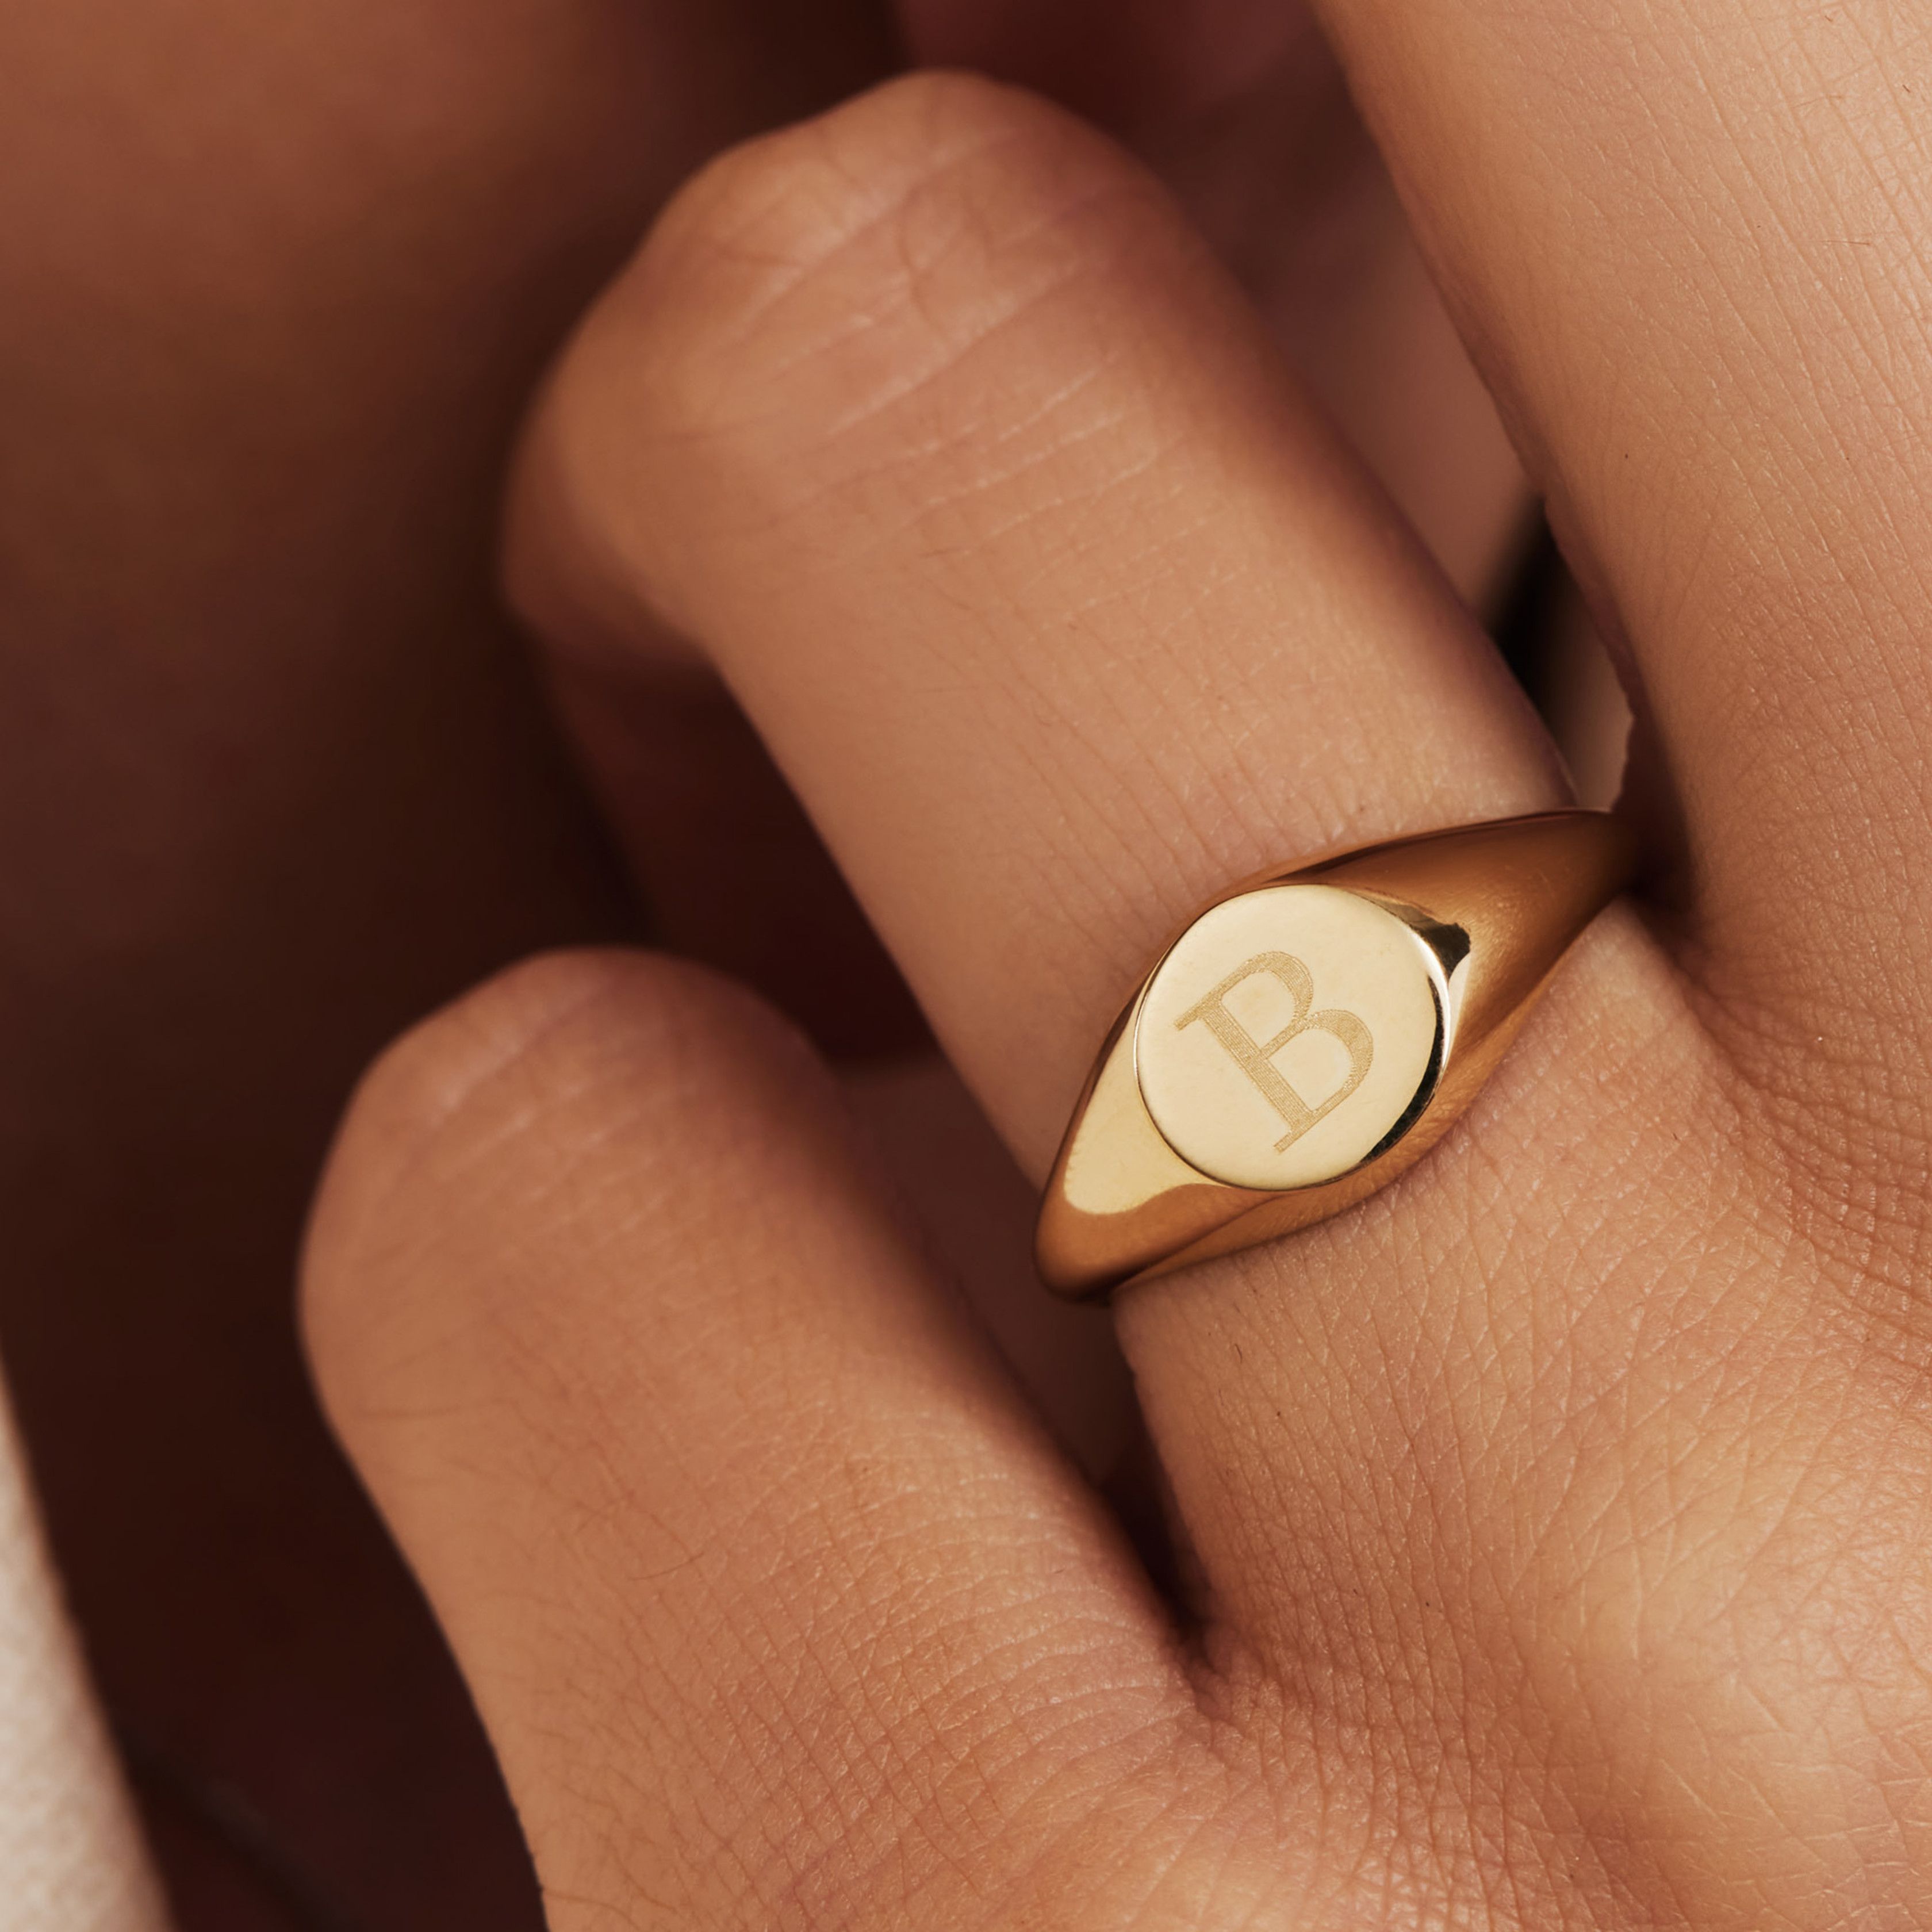 Simple Gold Ring Designs for Teenagers